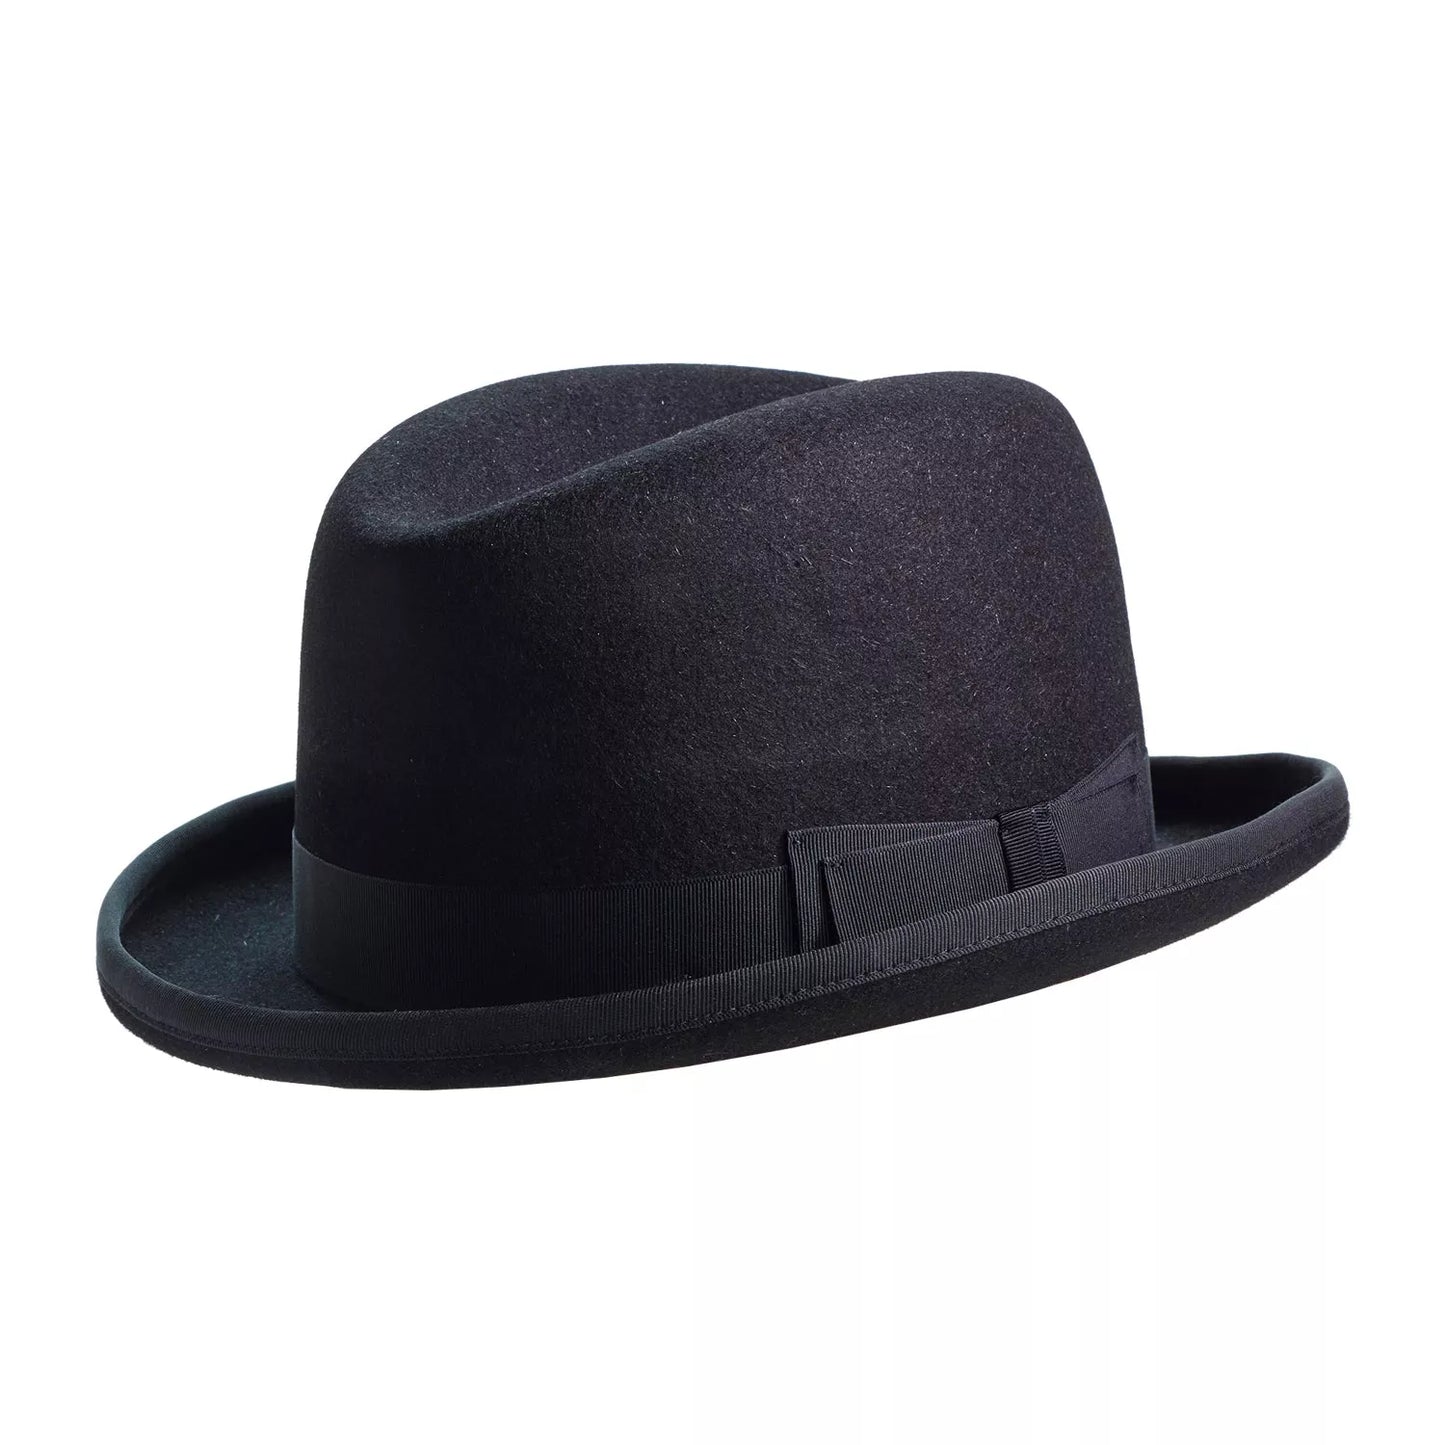 Elevate Your Style With Distinctive Homburg Hat Crafted By Laird Hatters